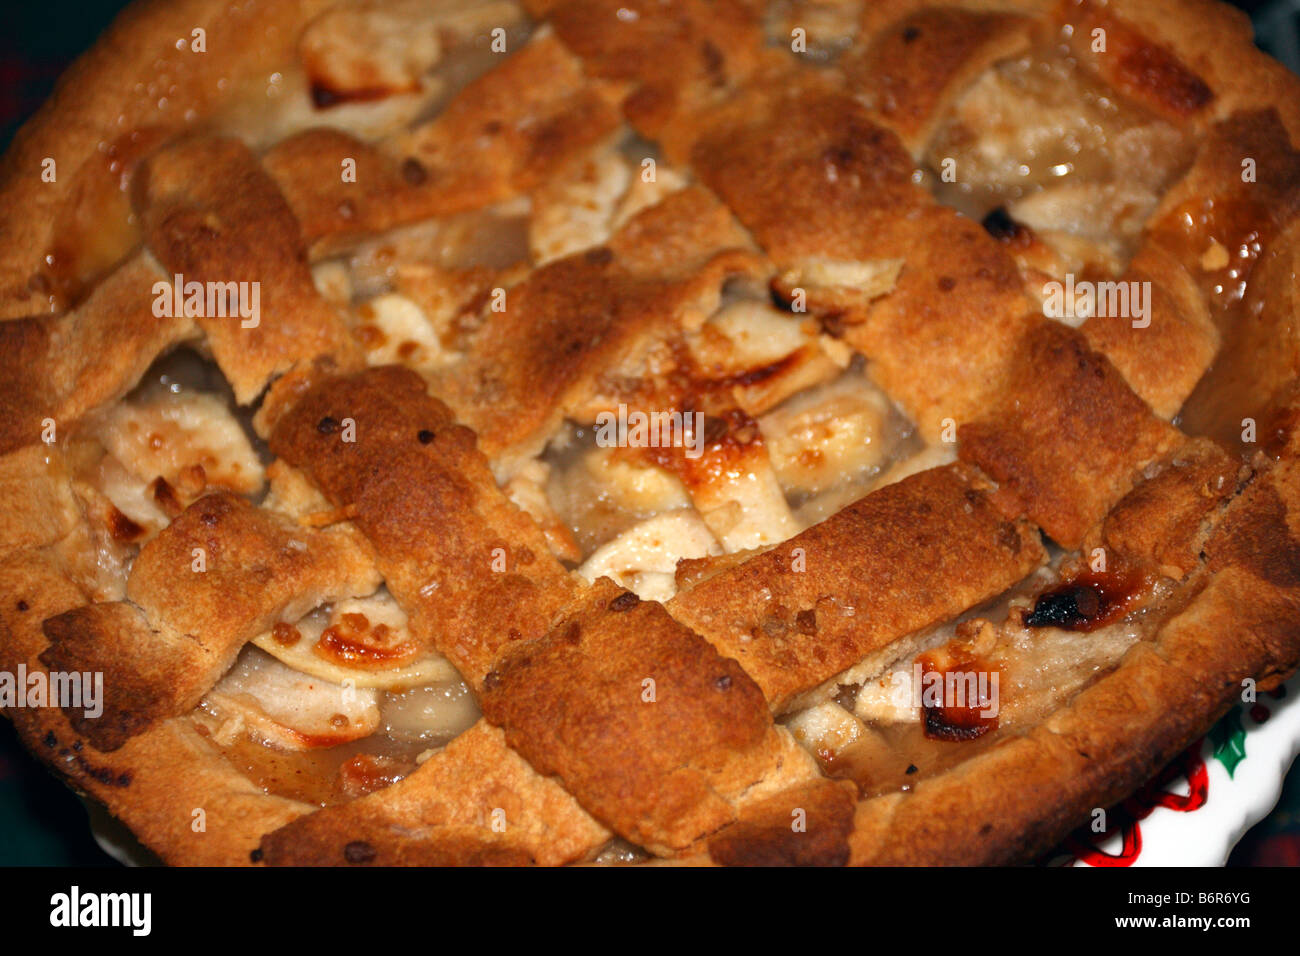 Browned apple pie crust, showing apple slices. Stock Photo